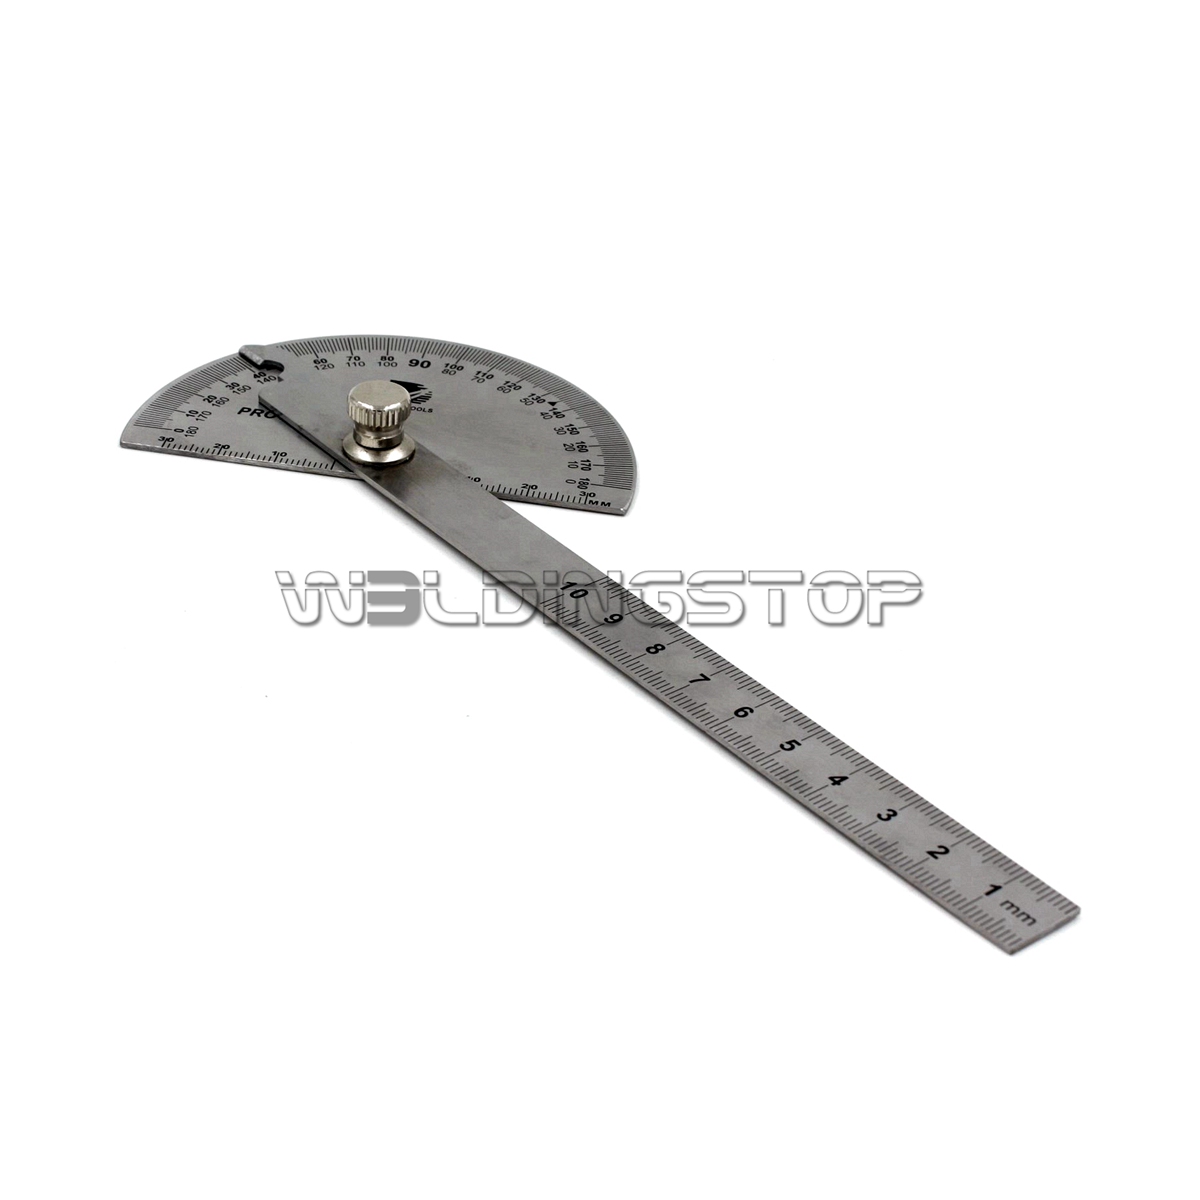 Stainless Steel & Laser engraving Angle Ruler Round Head Rotary Protractor 